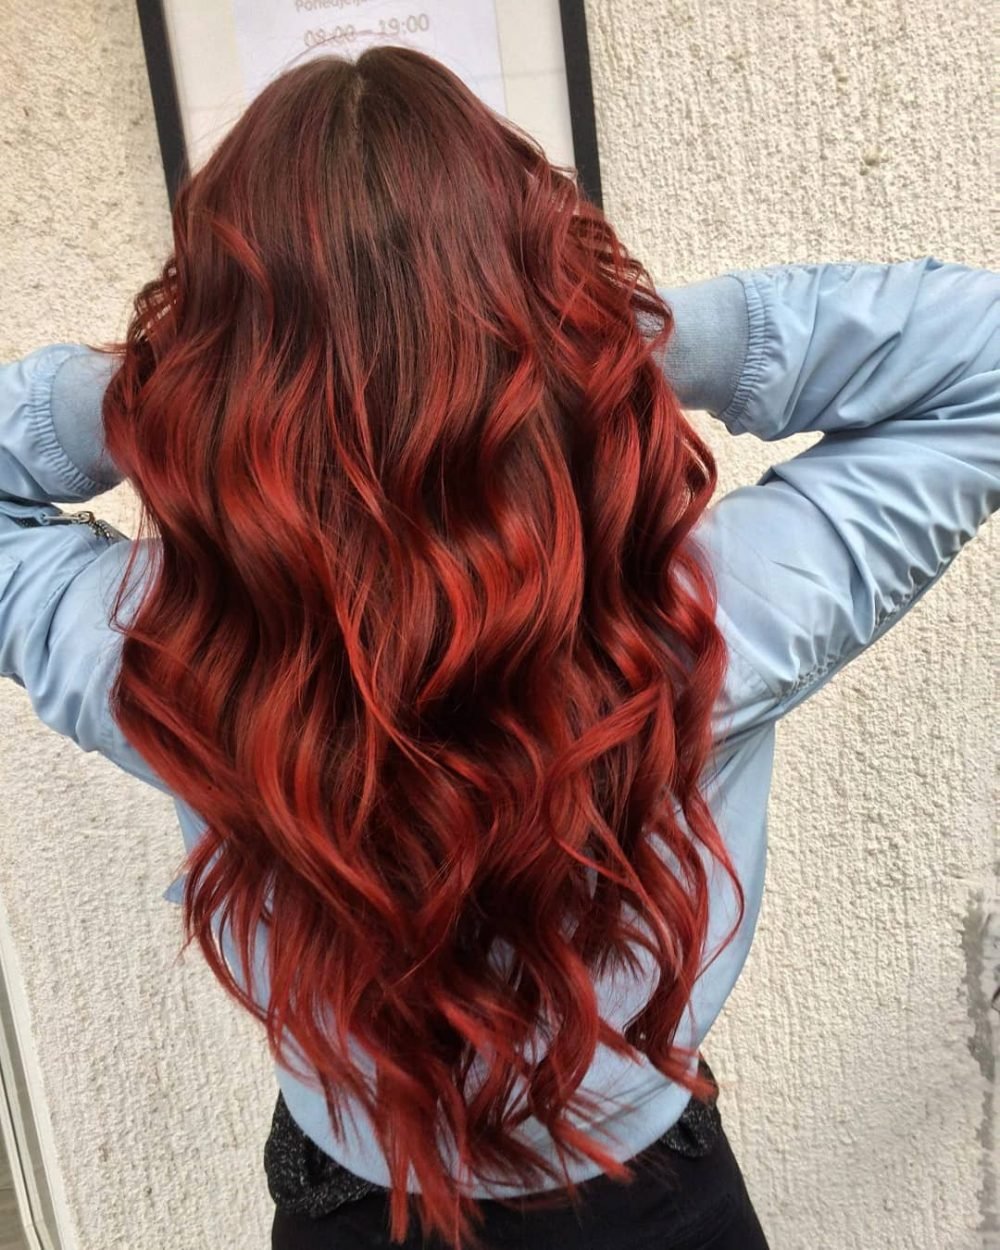 Red Balayage Hair Colors: 35 Hottest Examples for 2022